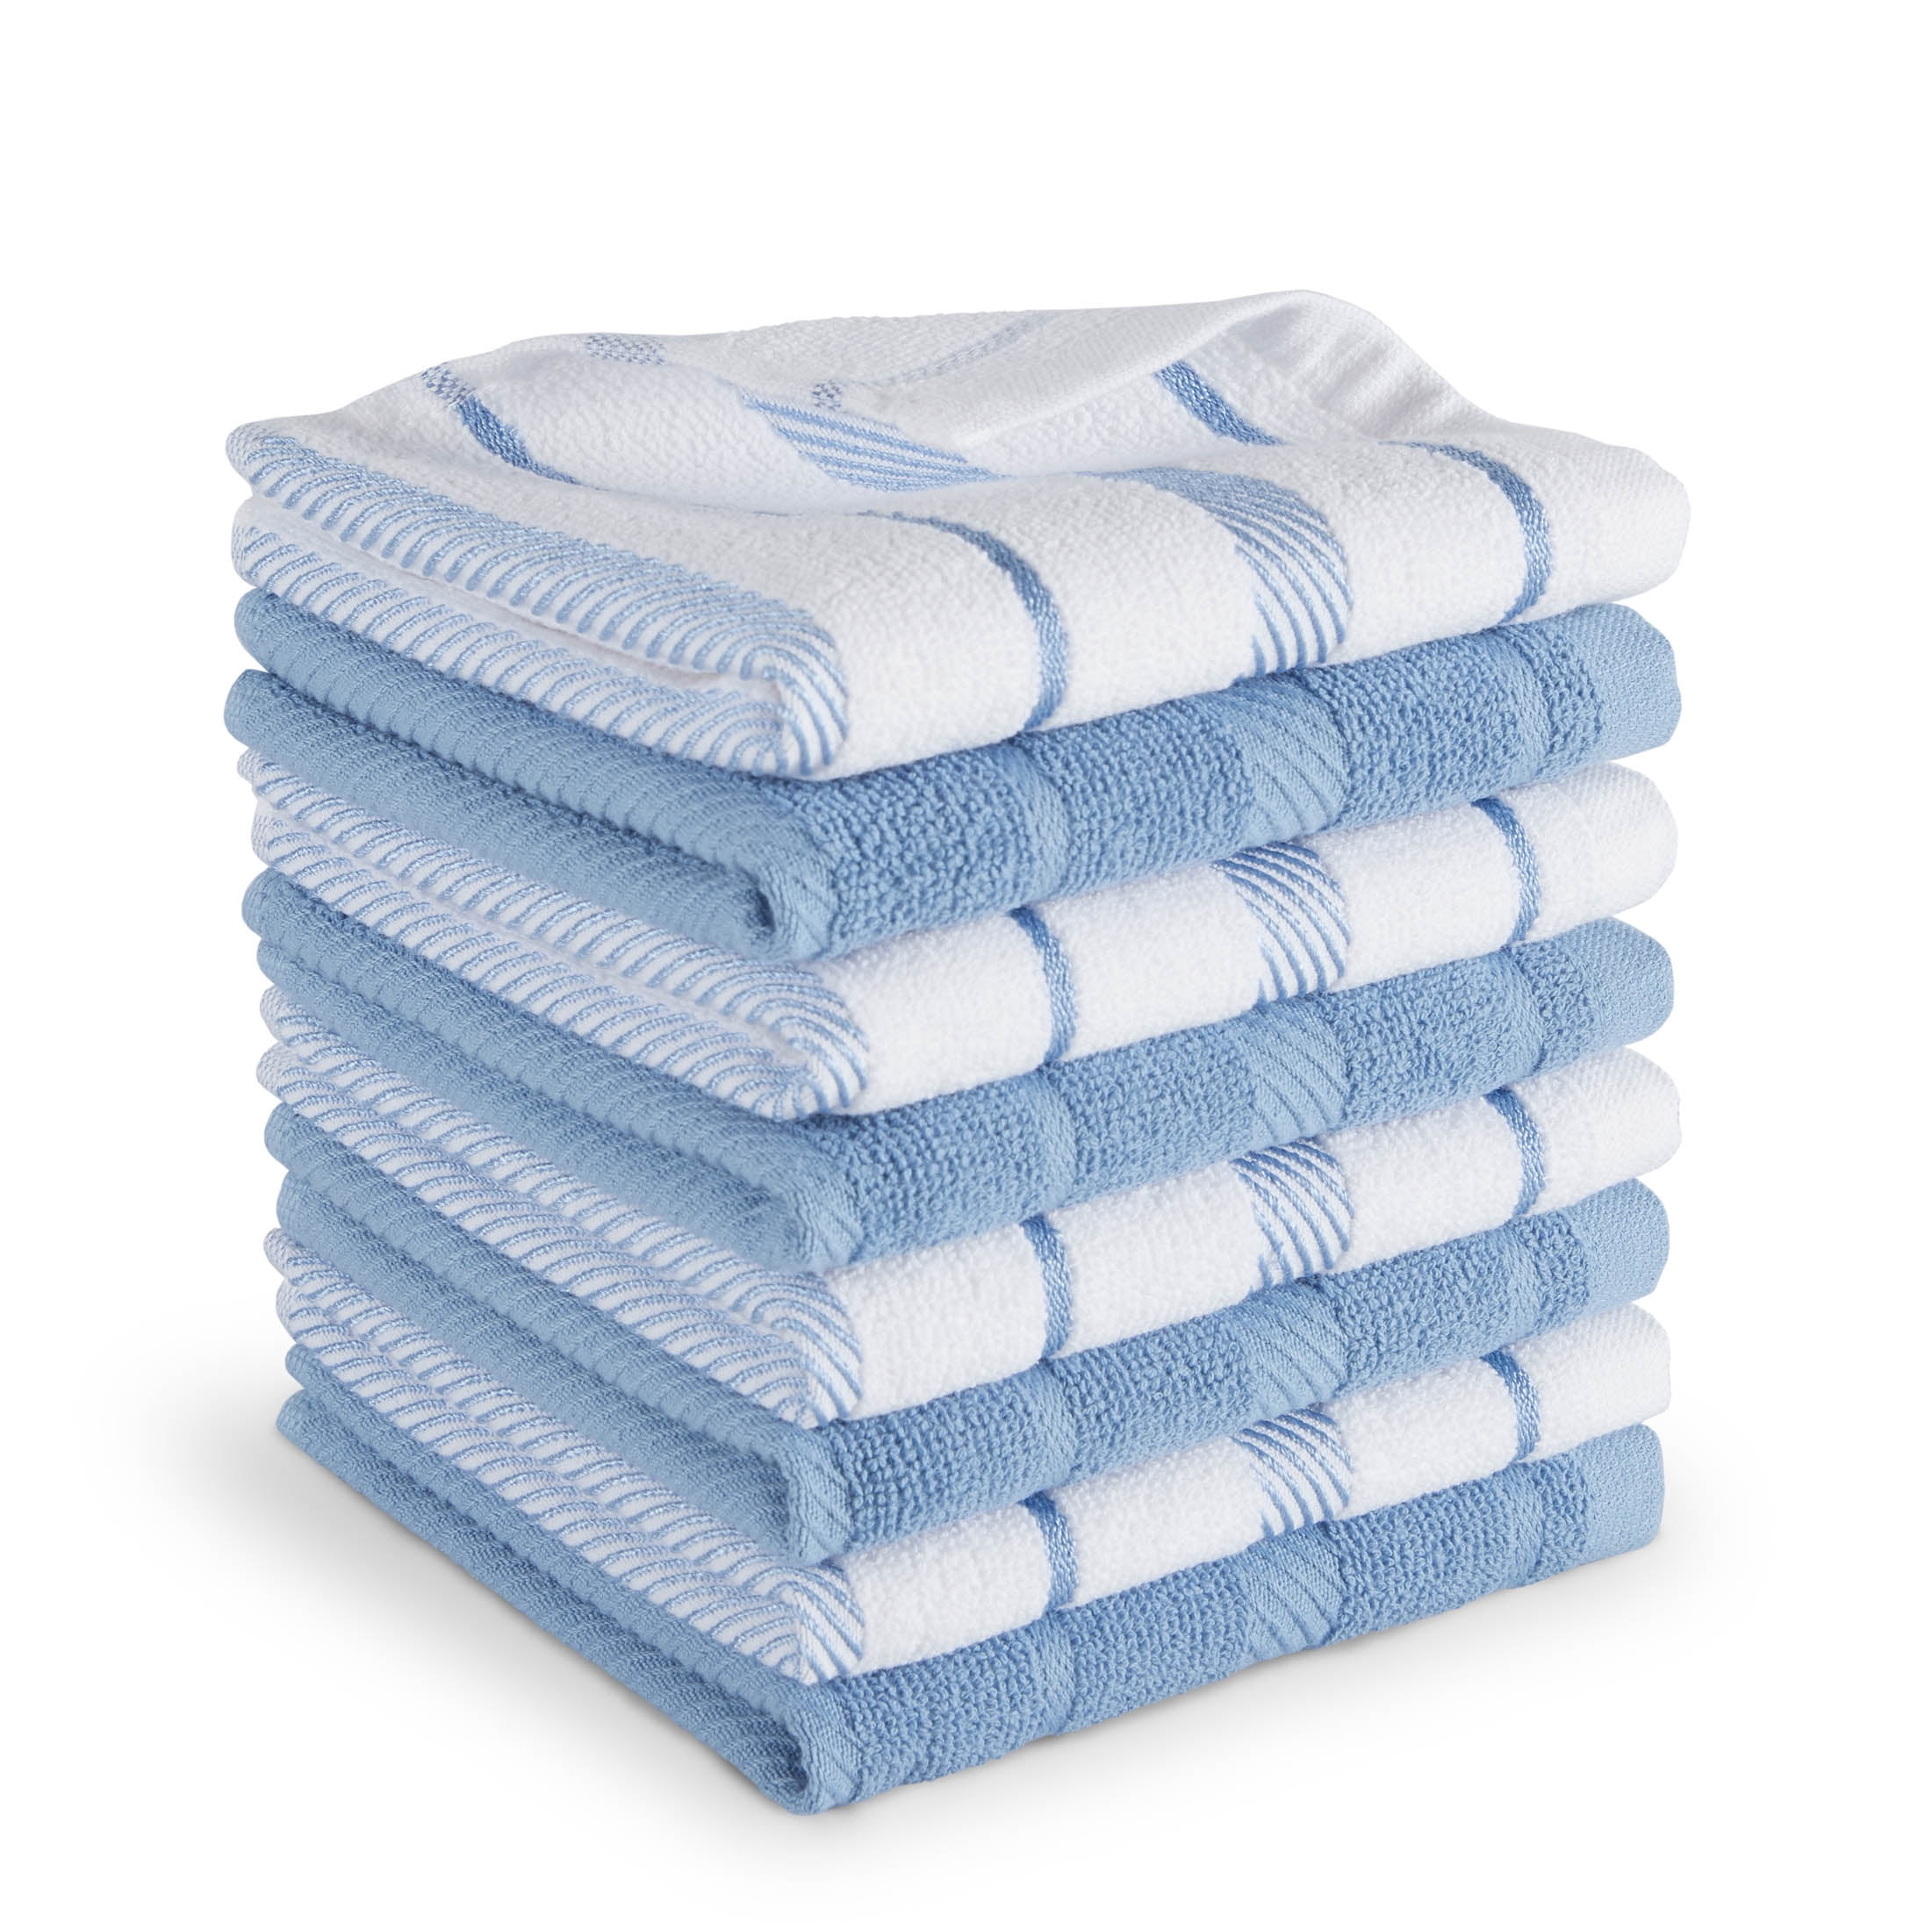 Ormysa Dish Cloths for Washing Dishes, Pack of 8, 12 x 12 in, Terry  Washcloths, Blue 